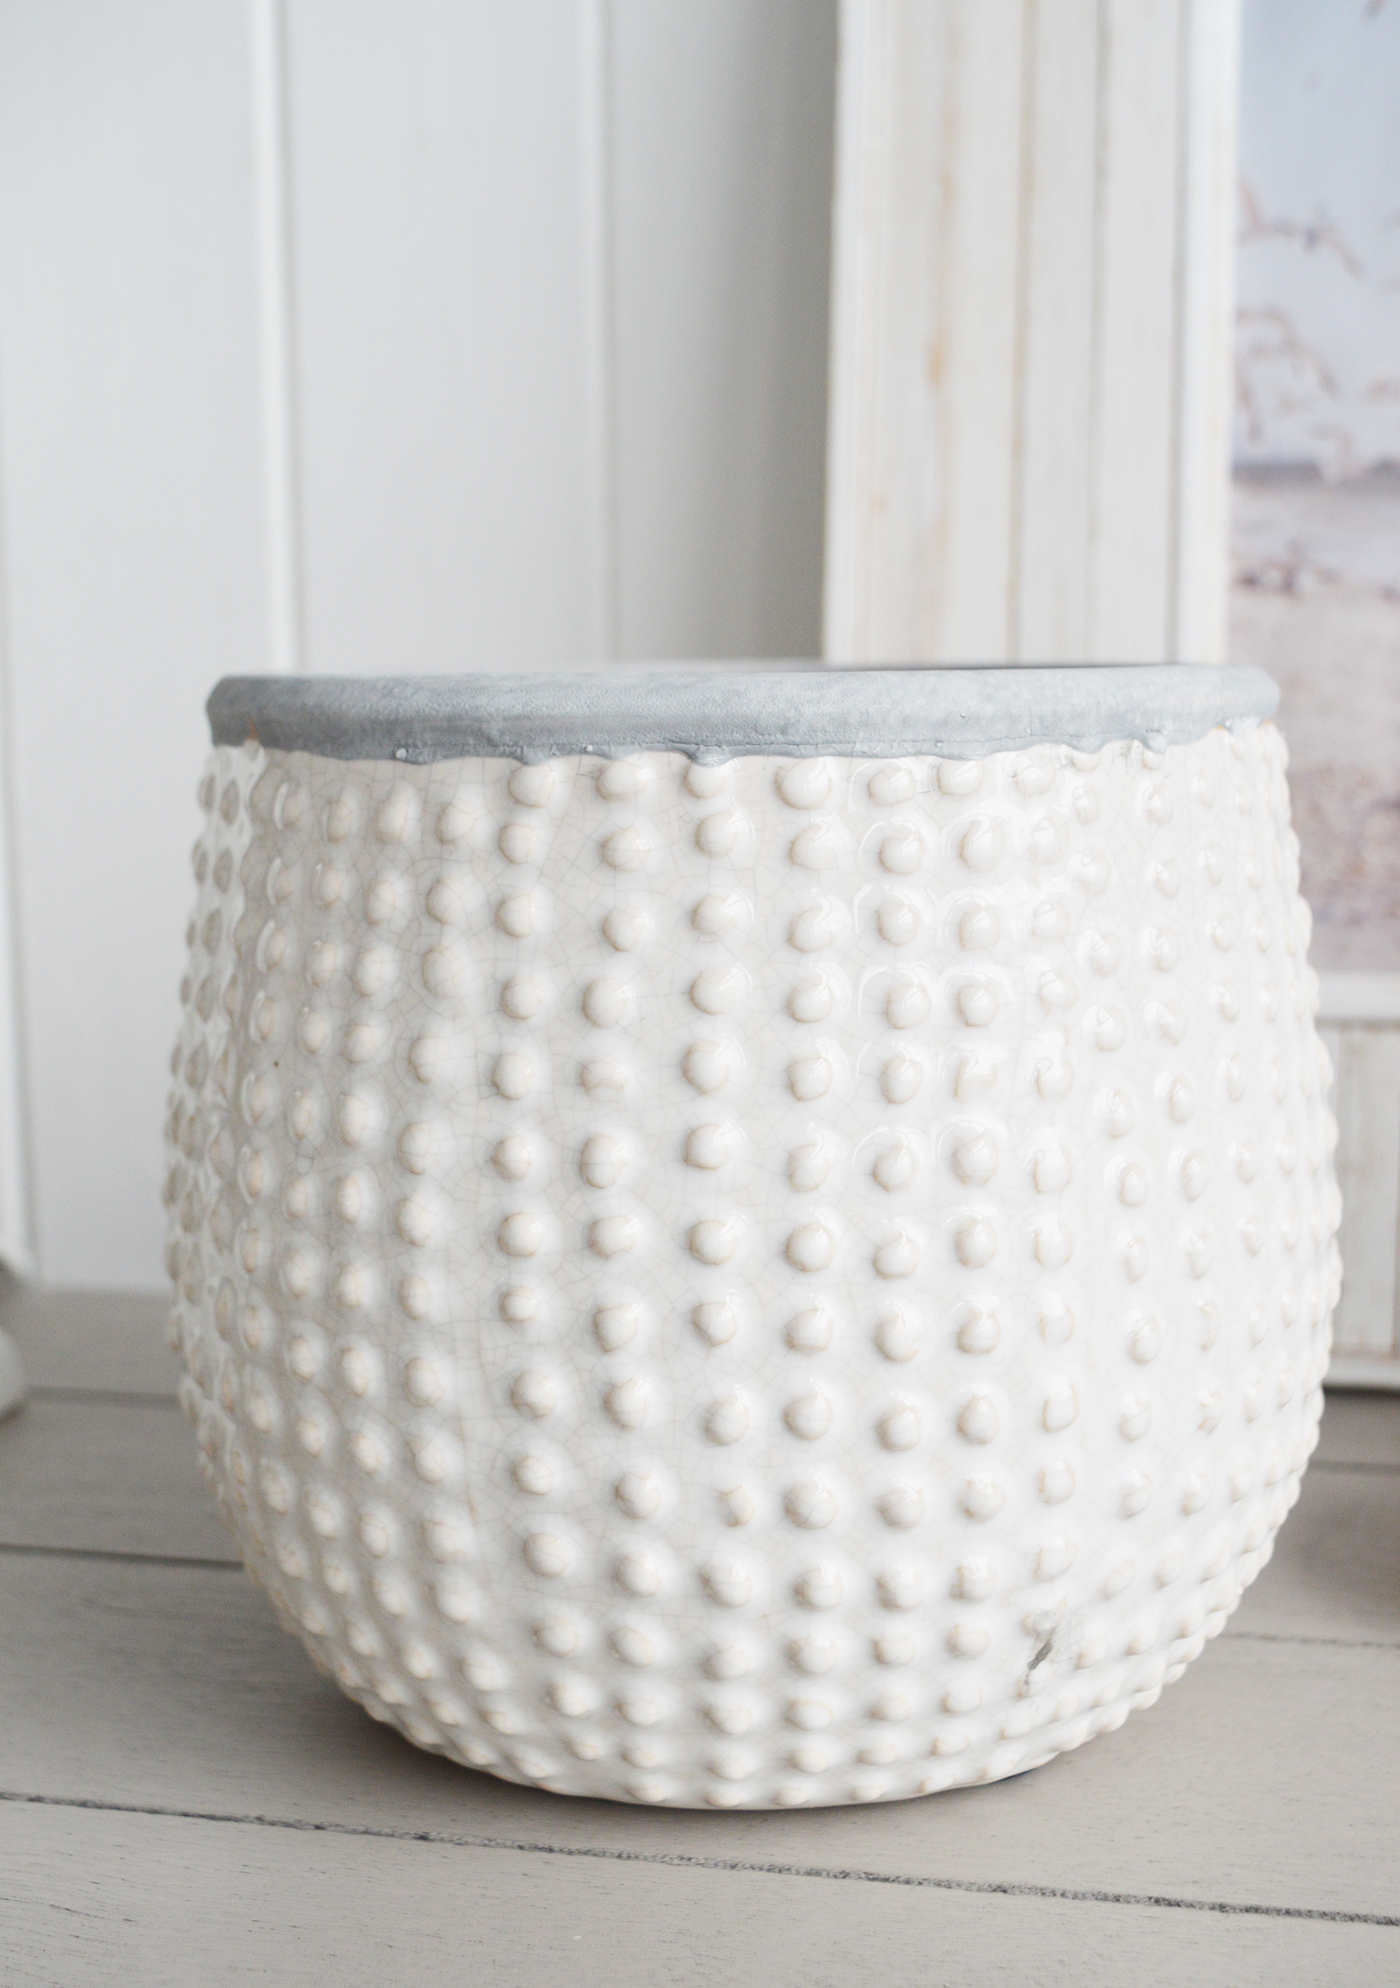 White Ceramic Bowl - White Furniture and home decor accessories for New England style homes for country, city, farmhouse and coastal from The White Lighthouse